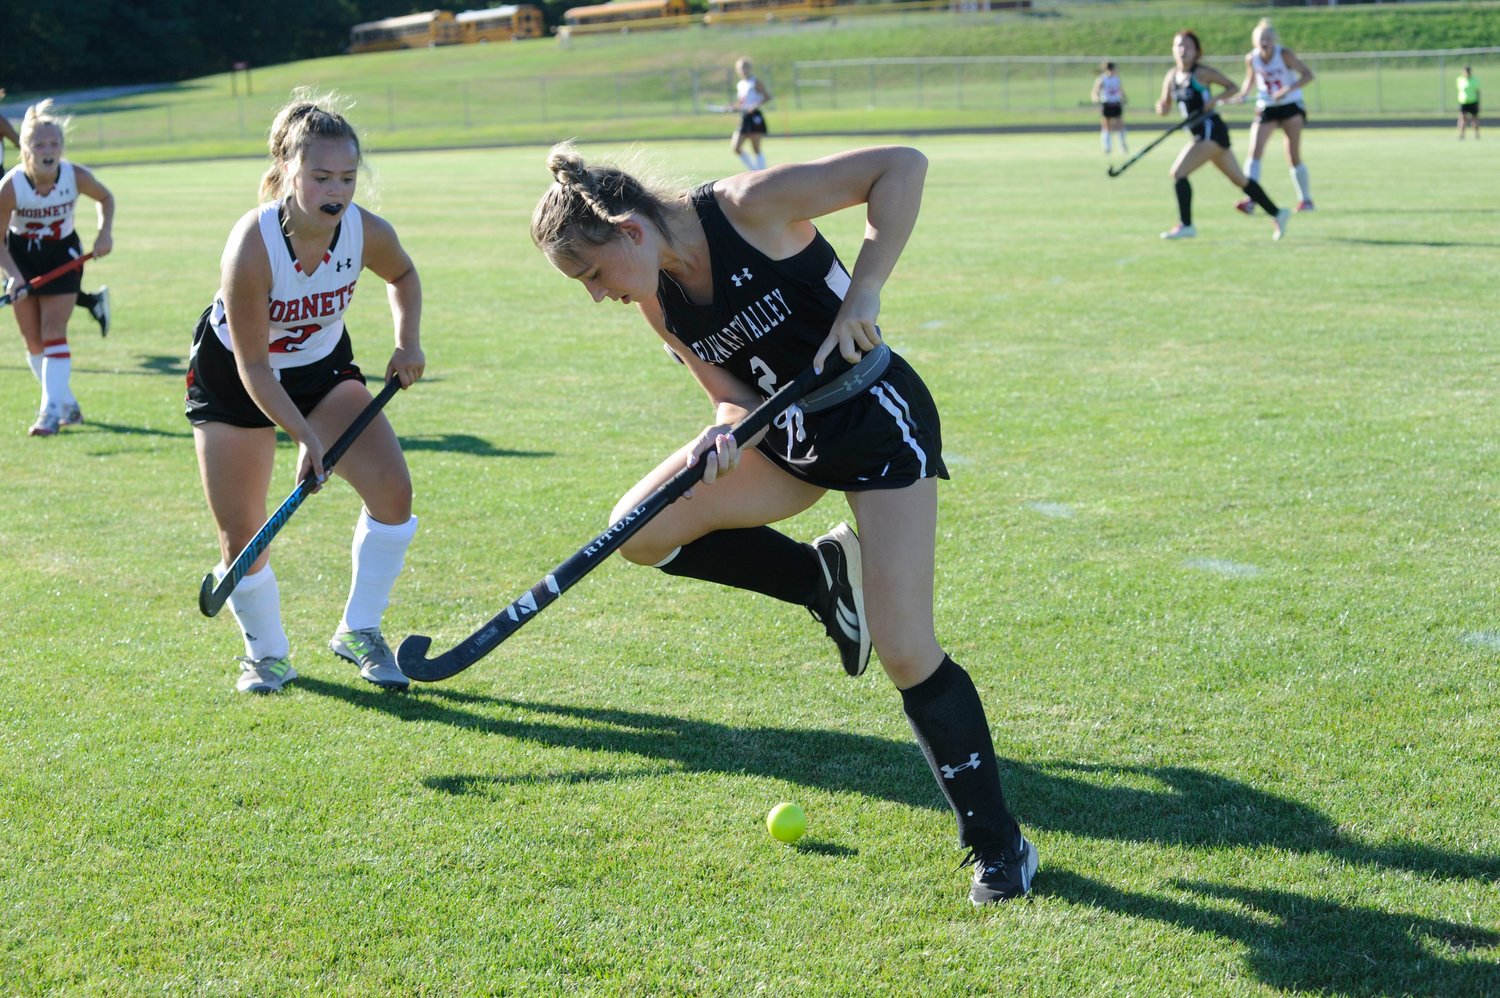 Hot-footin’ field hockey. Delaware Valley’s Ava O’Grady shows off a few improvised dance moves on the green as Honesdale’s Jillian Hoey closes in on the play...